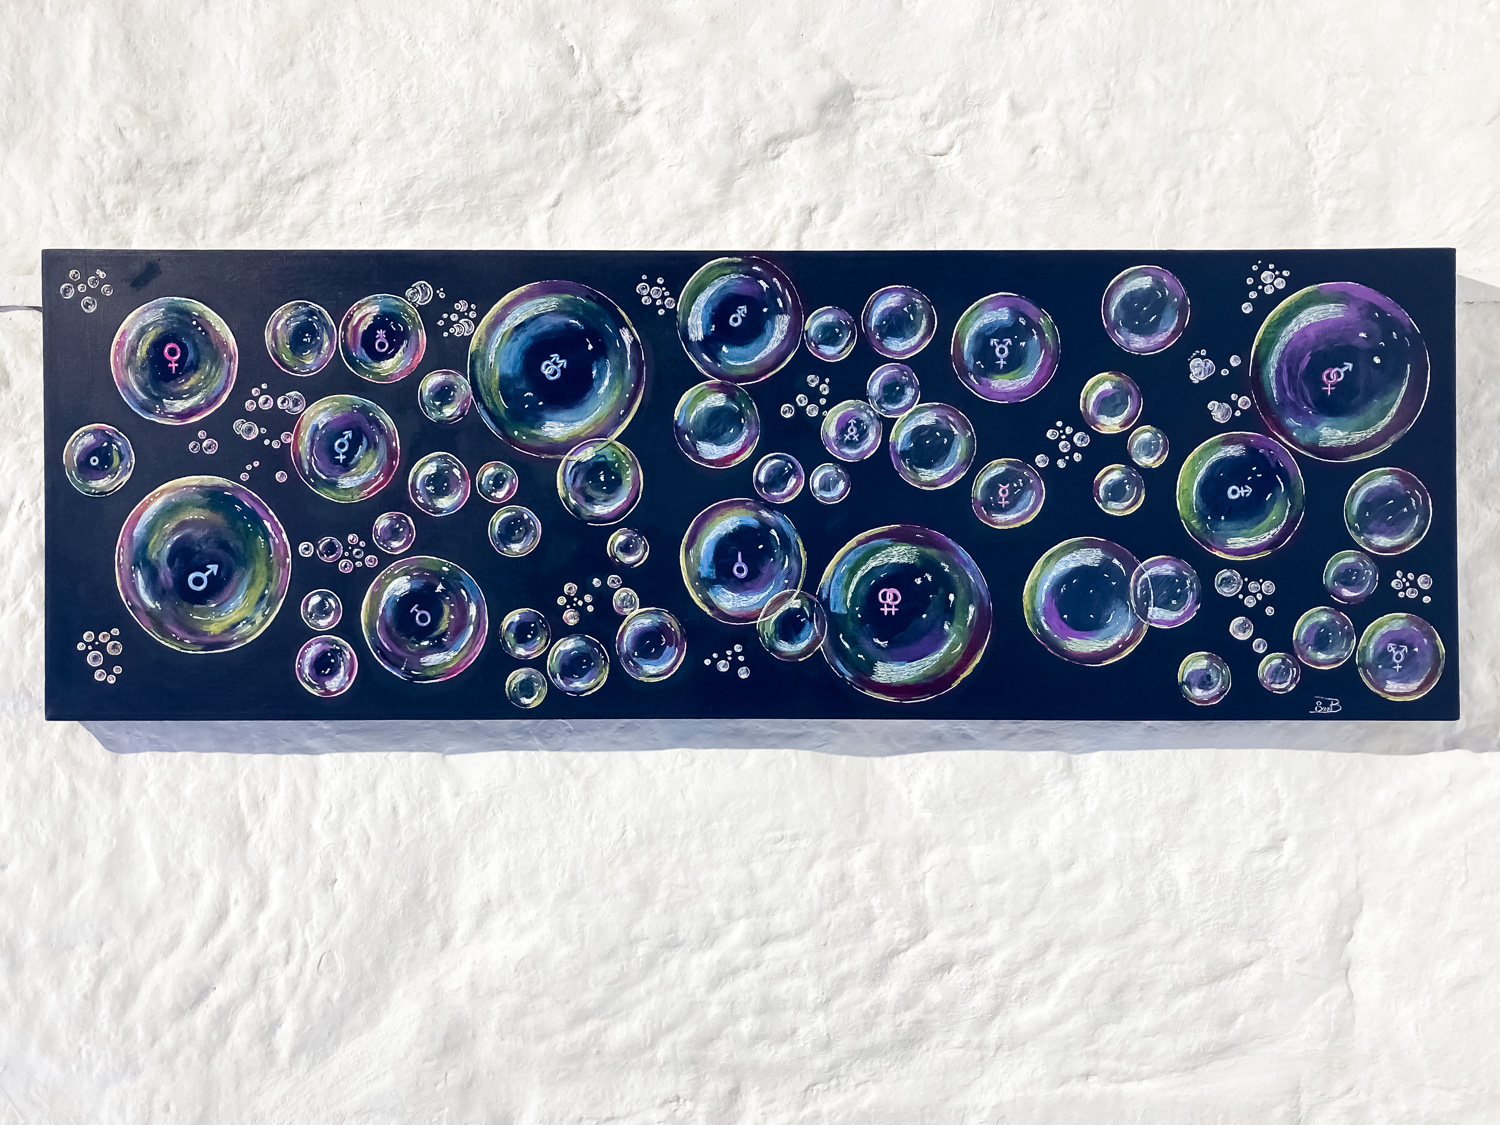 A painting of coloured bubbles of varying sizes, some with gender and relationship symbols, on a black background, hanging on a white wall